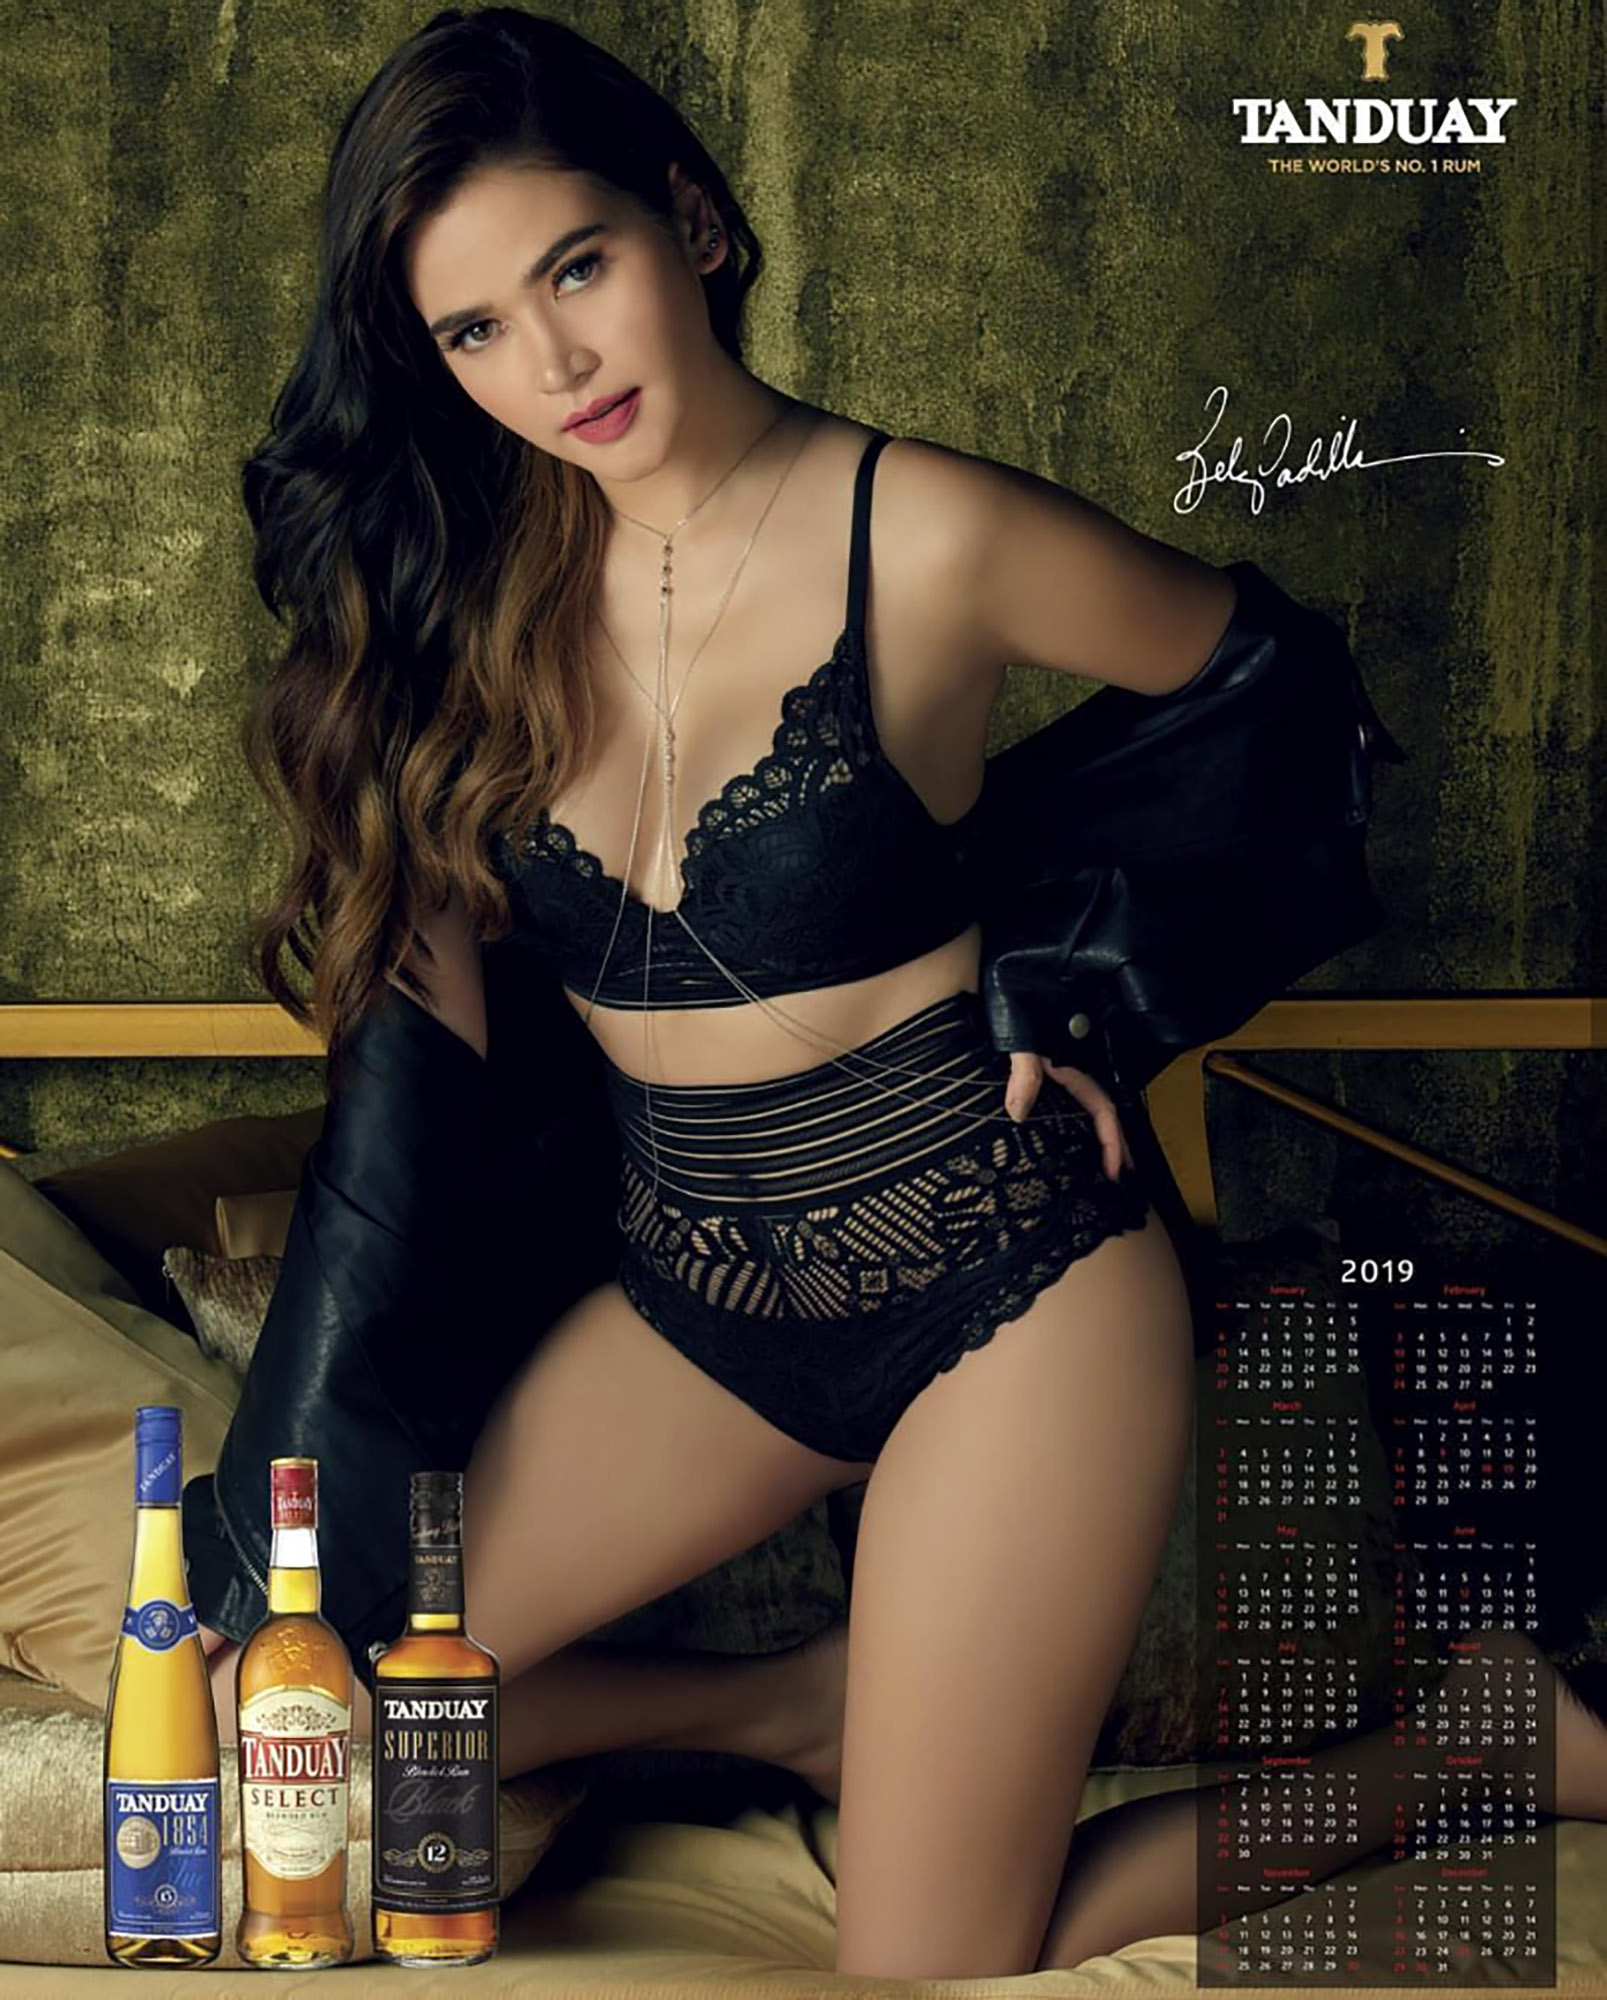 The Tanduay Calendar Girls From 2010-2020 Ranked! | Ao: All Out